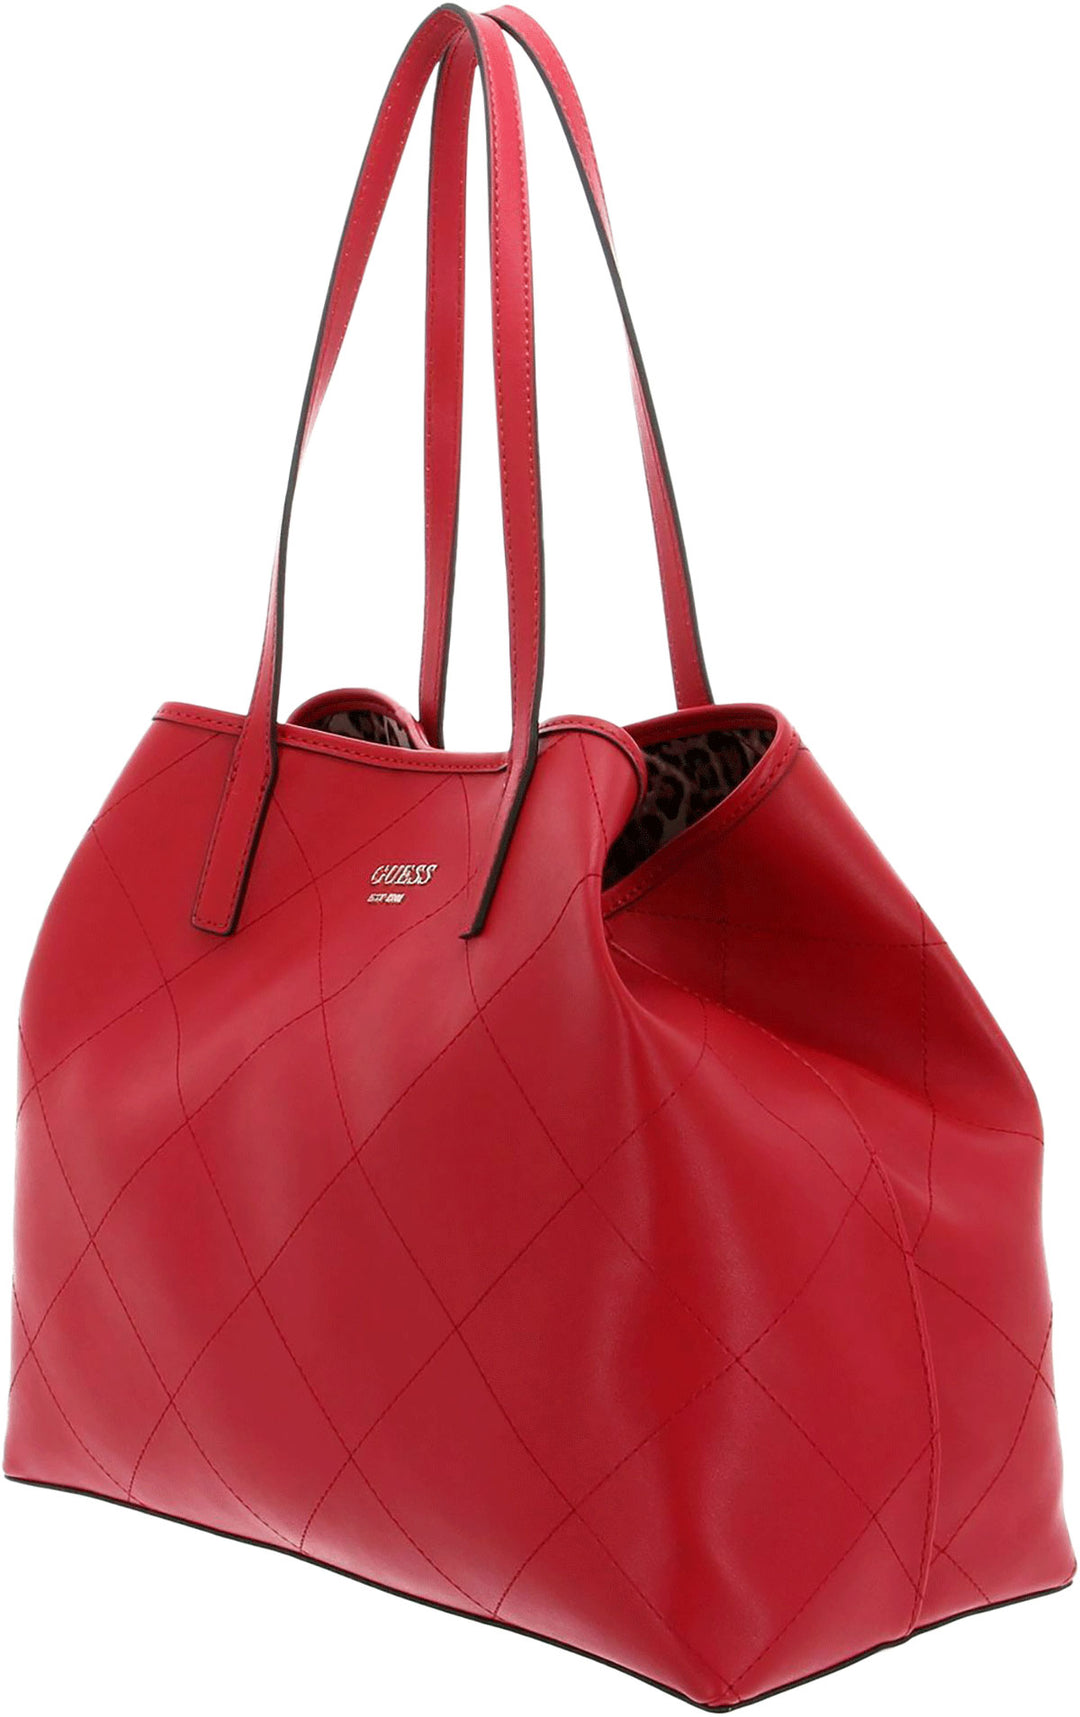 Guess, Bags, Guess Red Tote Bag